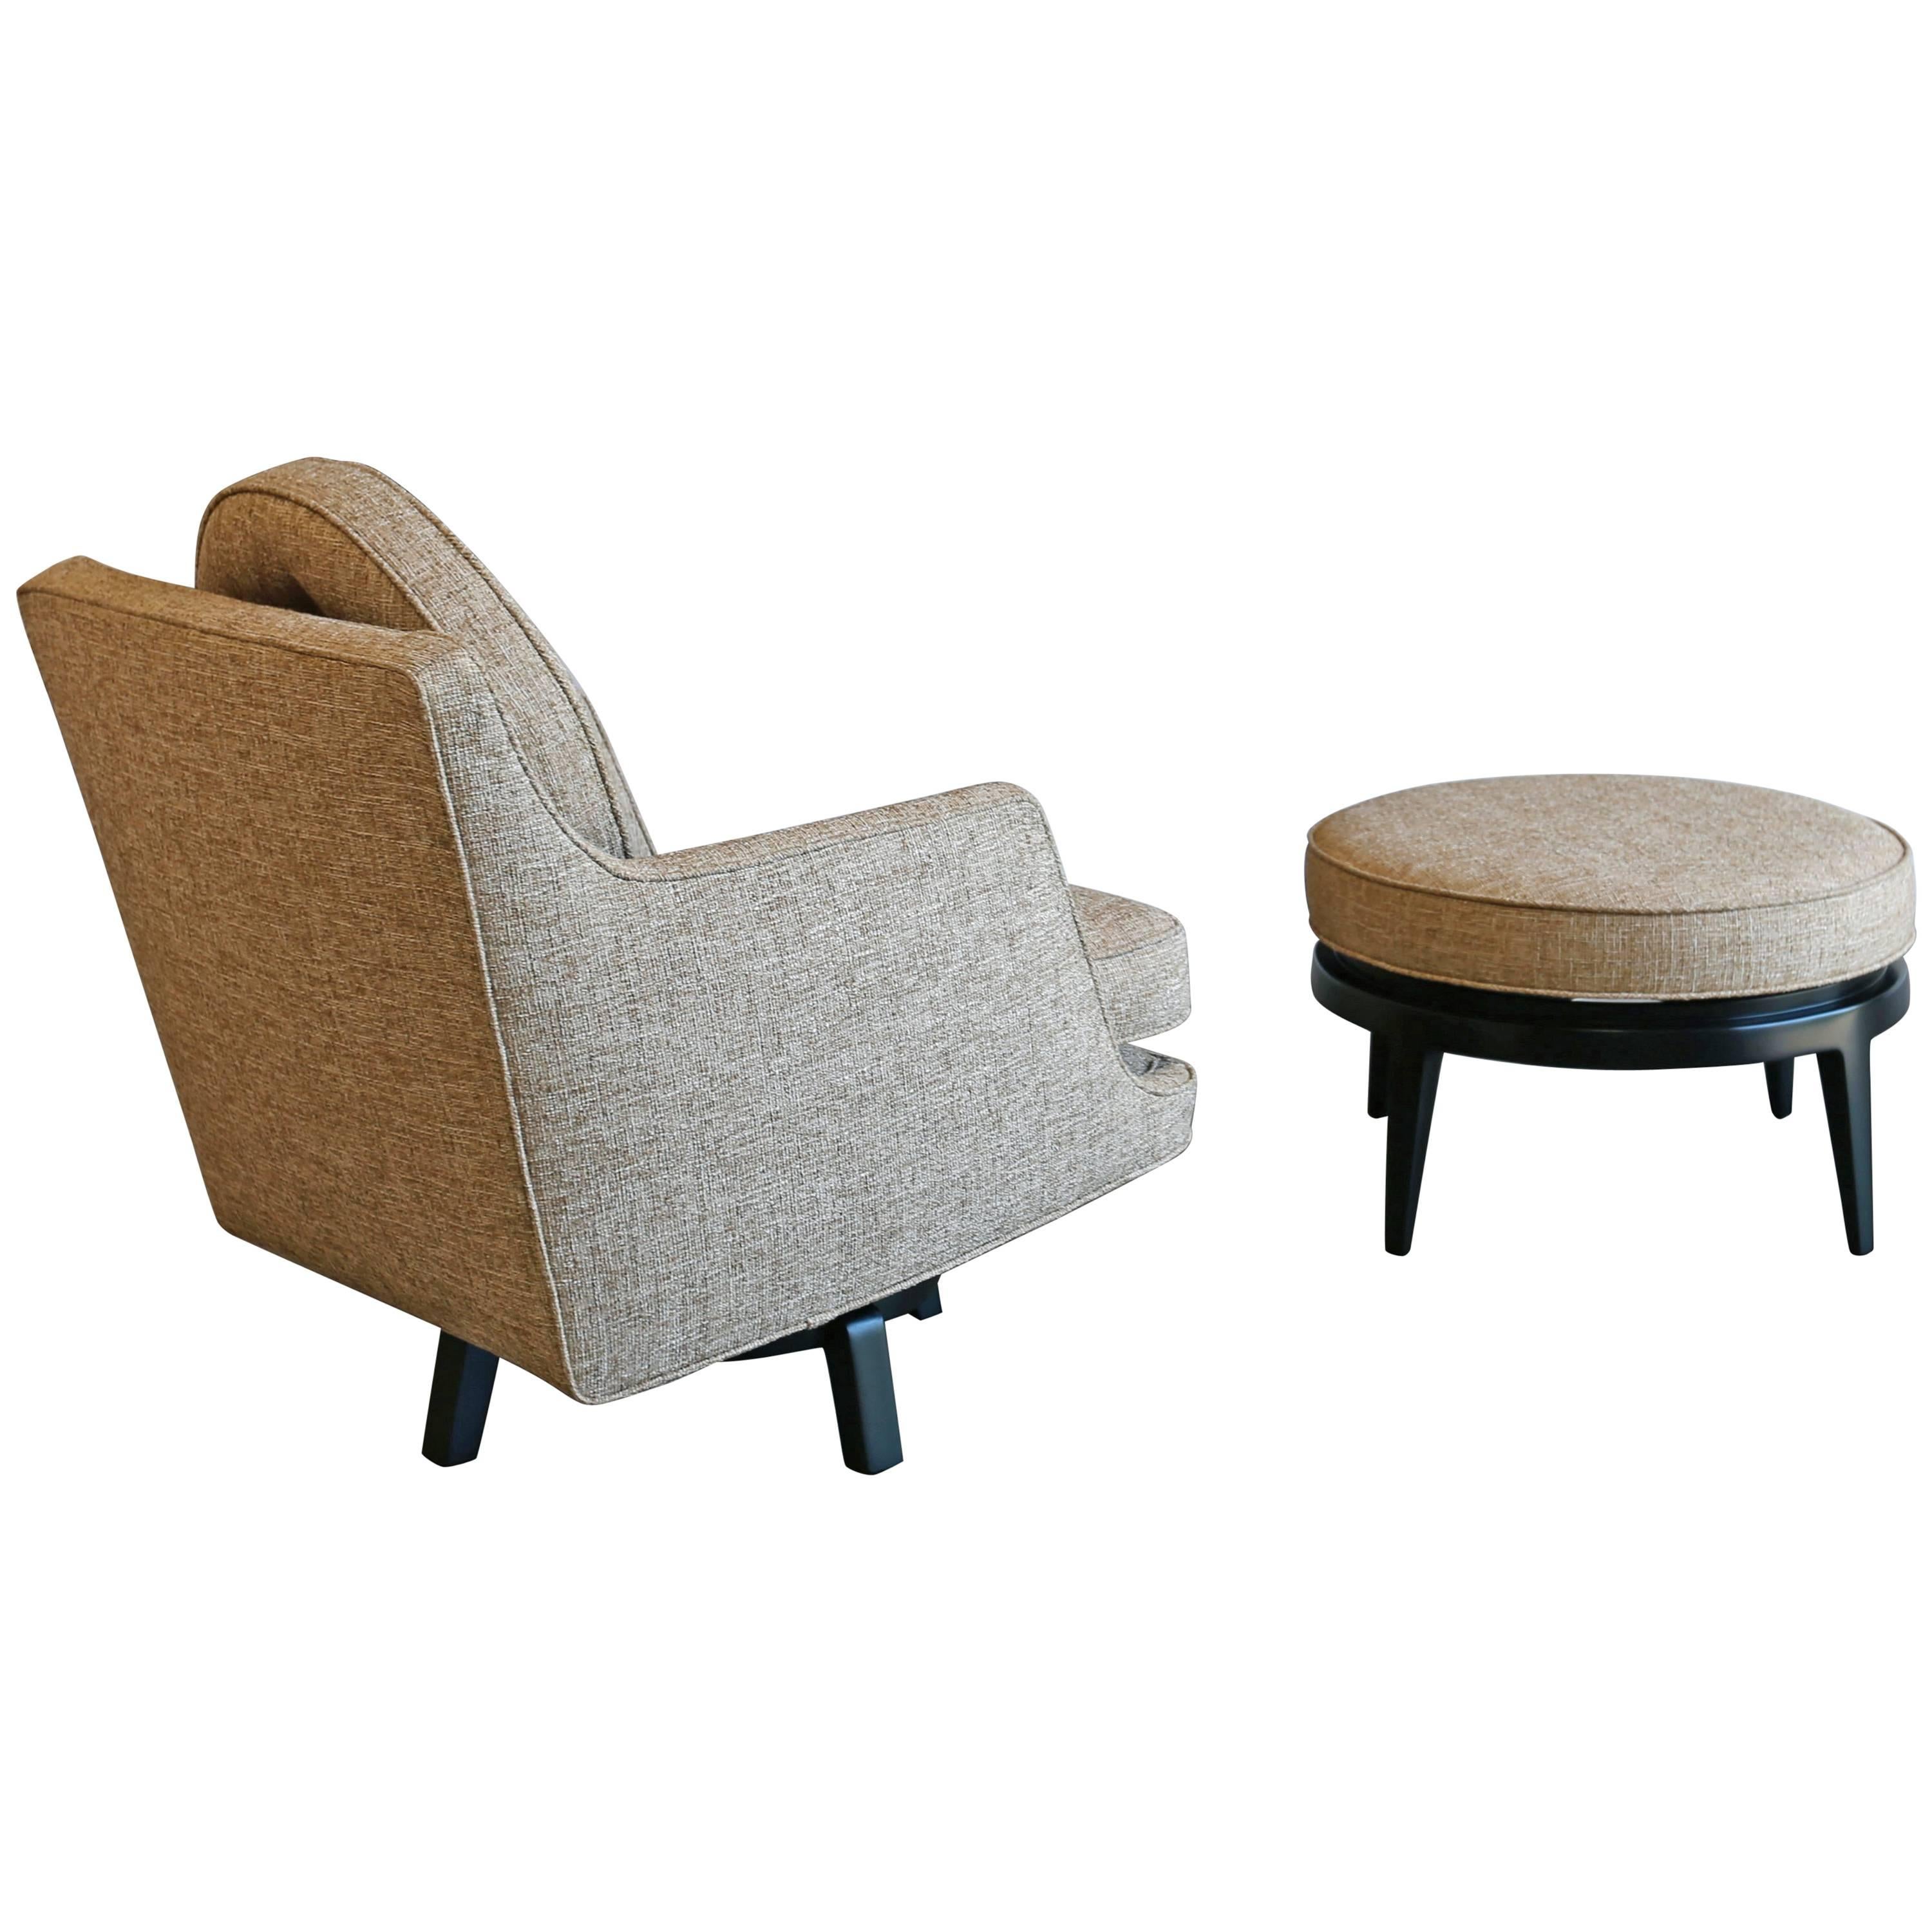 Swivel Lounge Chair and Ottoman by Edward Wormley for Dunbar